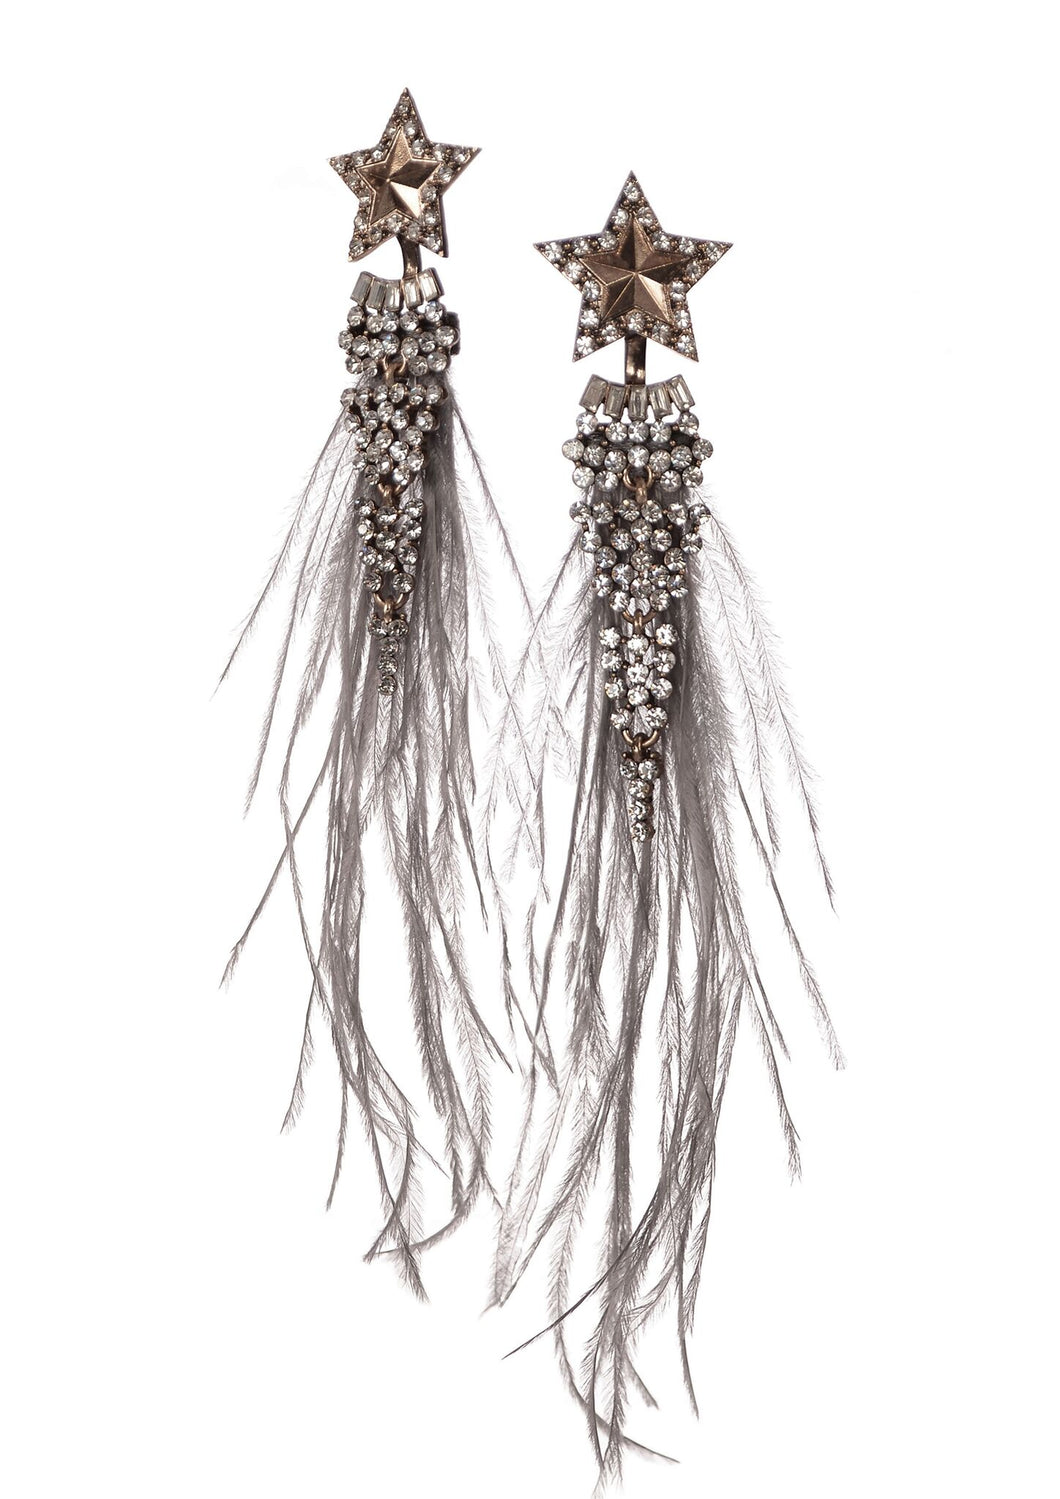 Limited Edition Wishing on A Star Earrings - Grey Mixed Crystal - Feathers Of Italy 